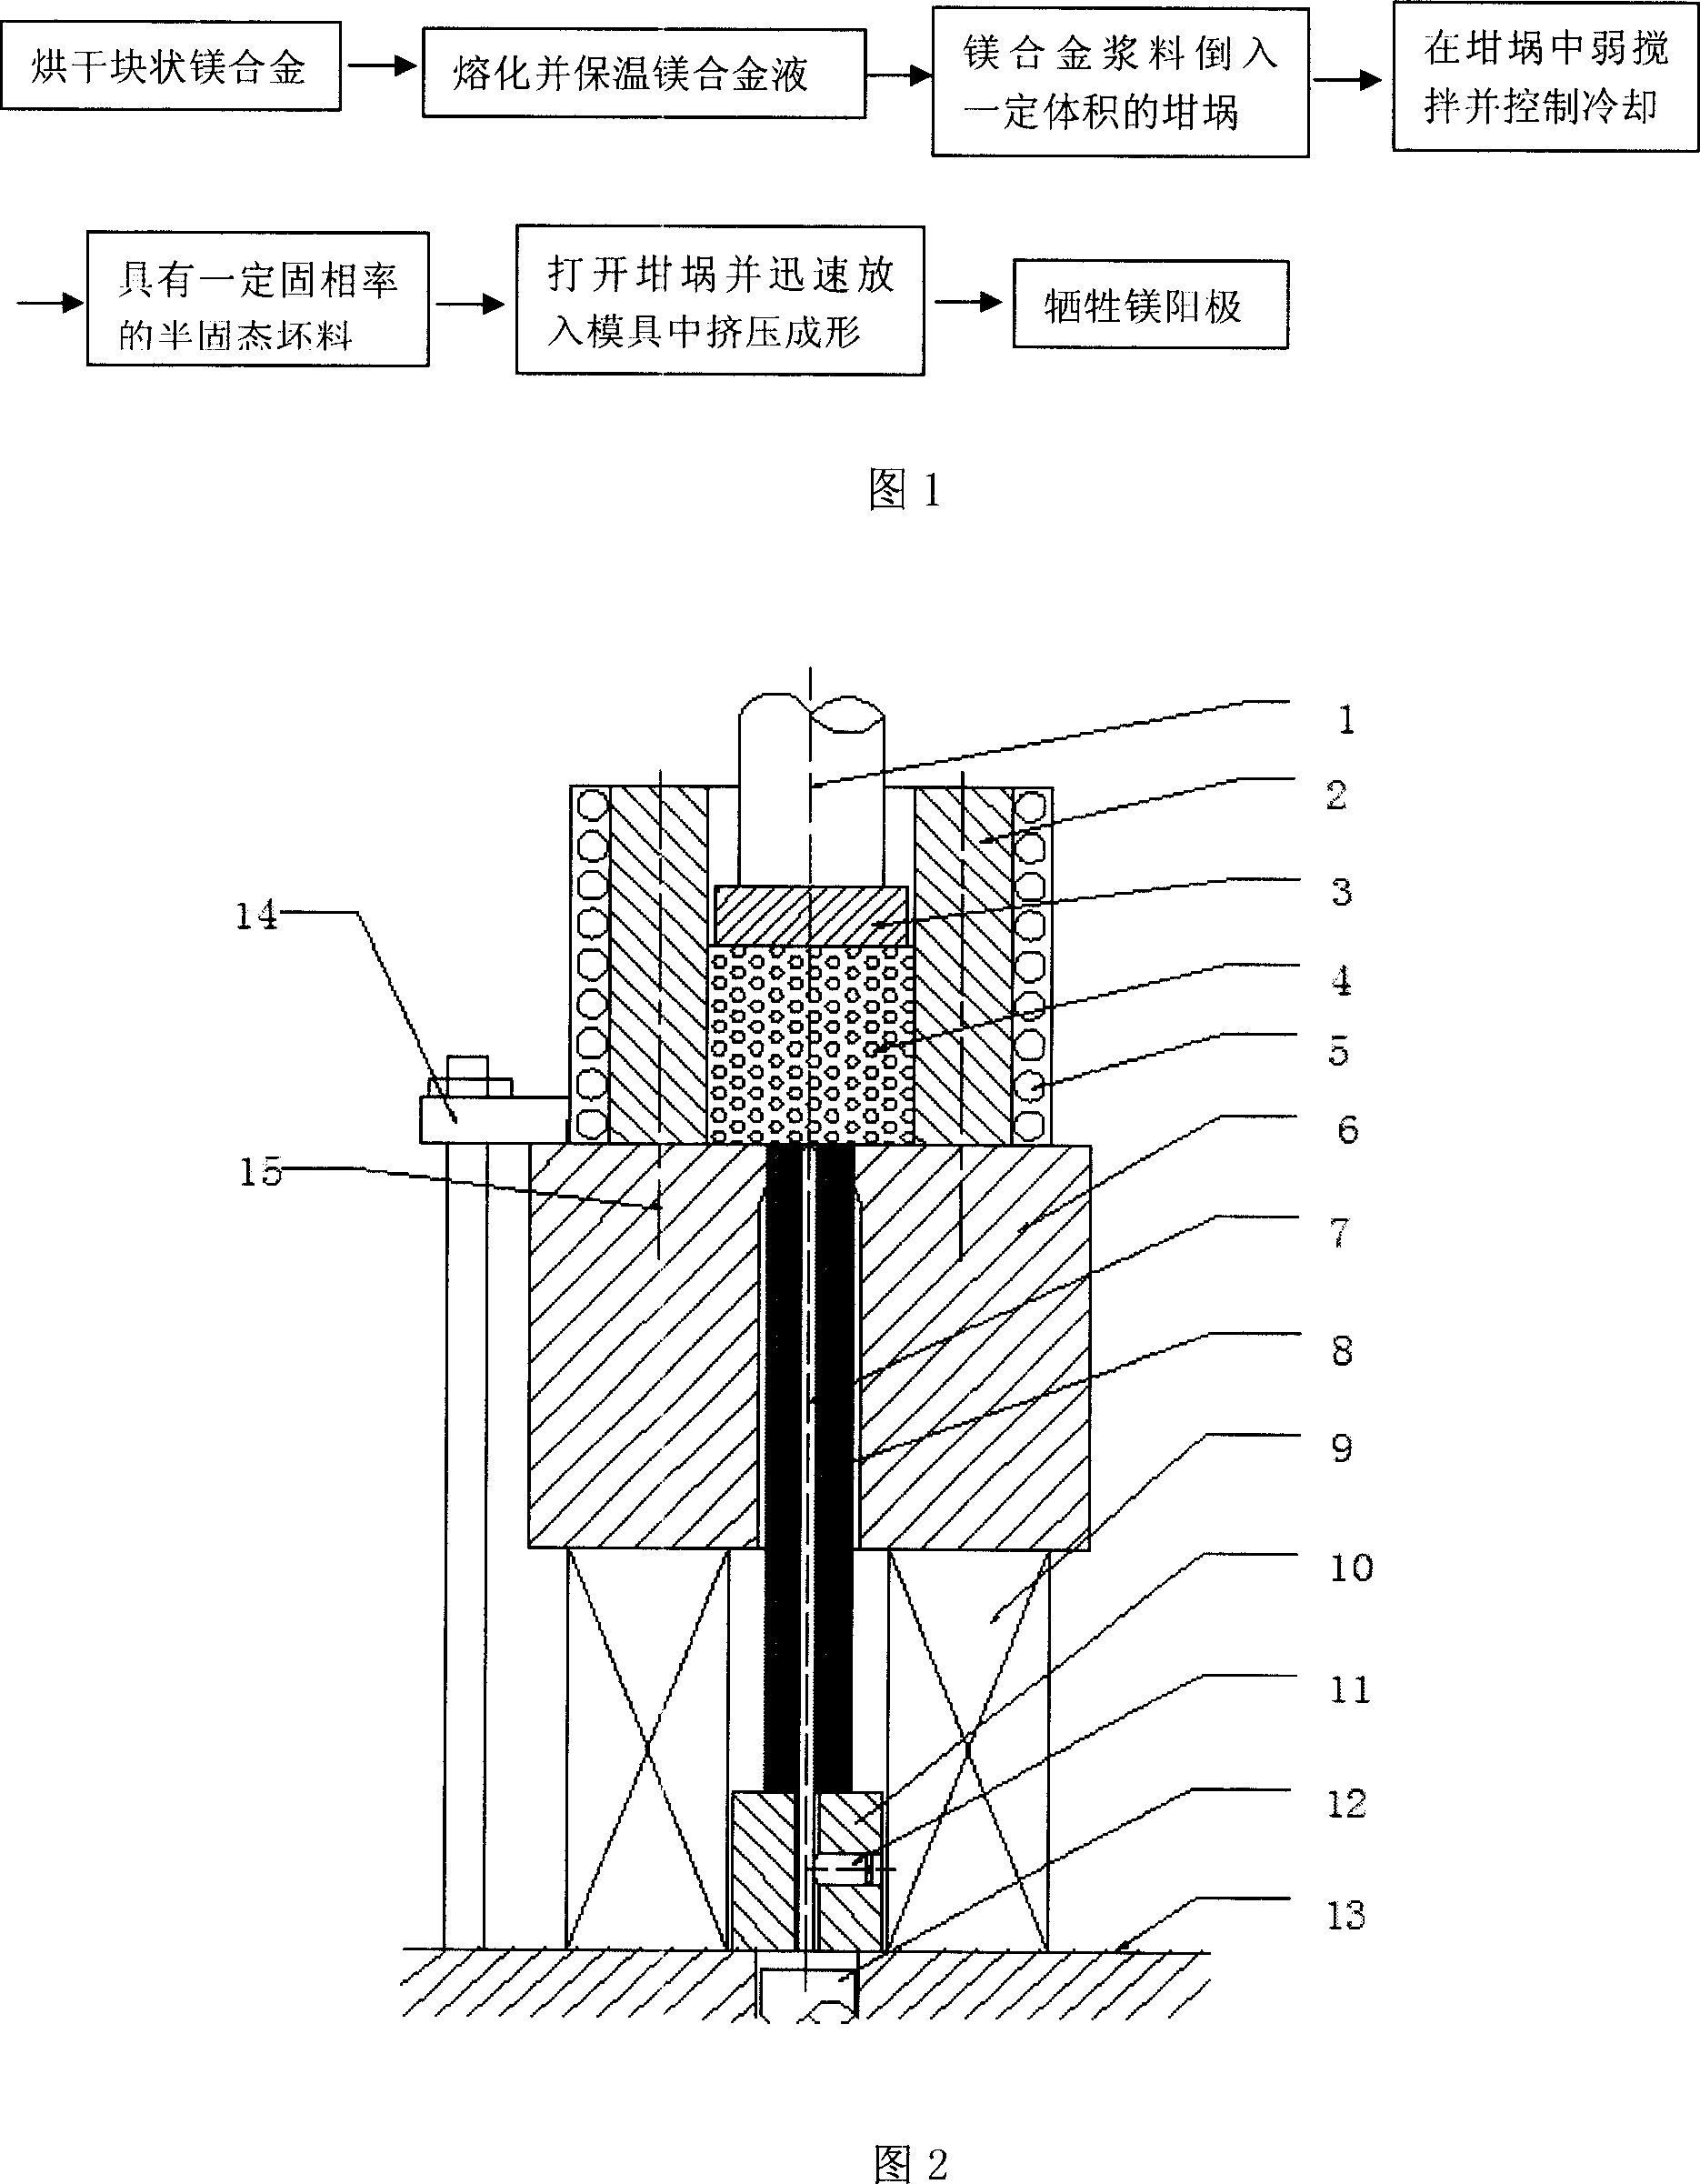 Manufacturing process for rheologic extrusion molding of sacrificial magnesium anode and device thereof